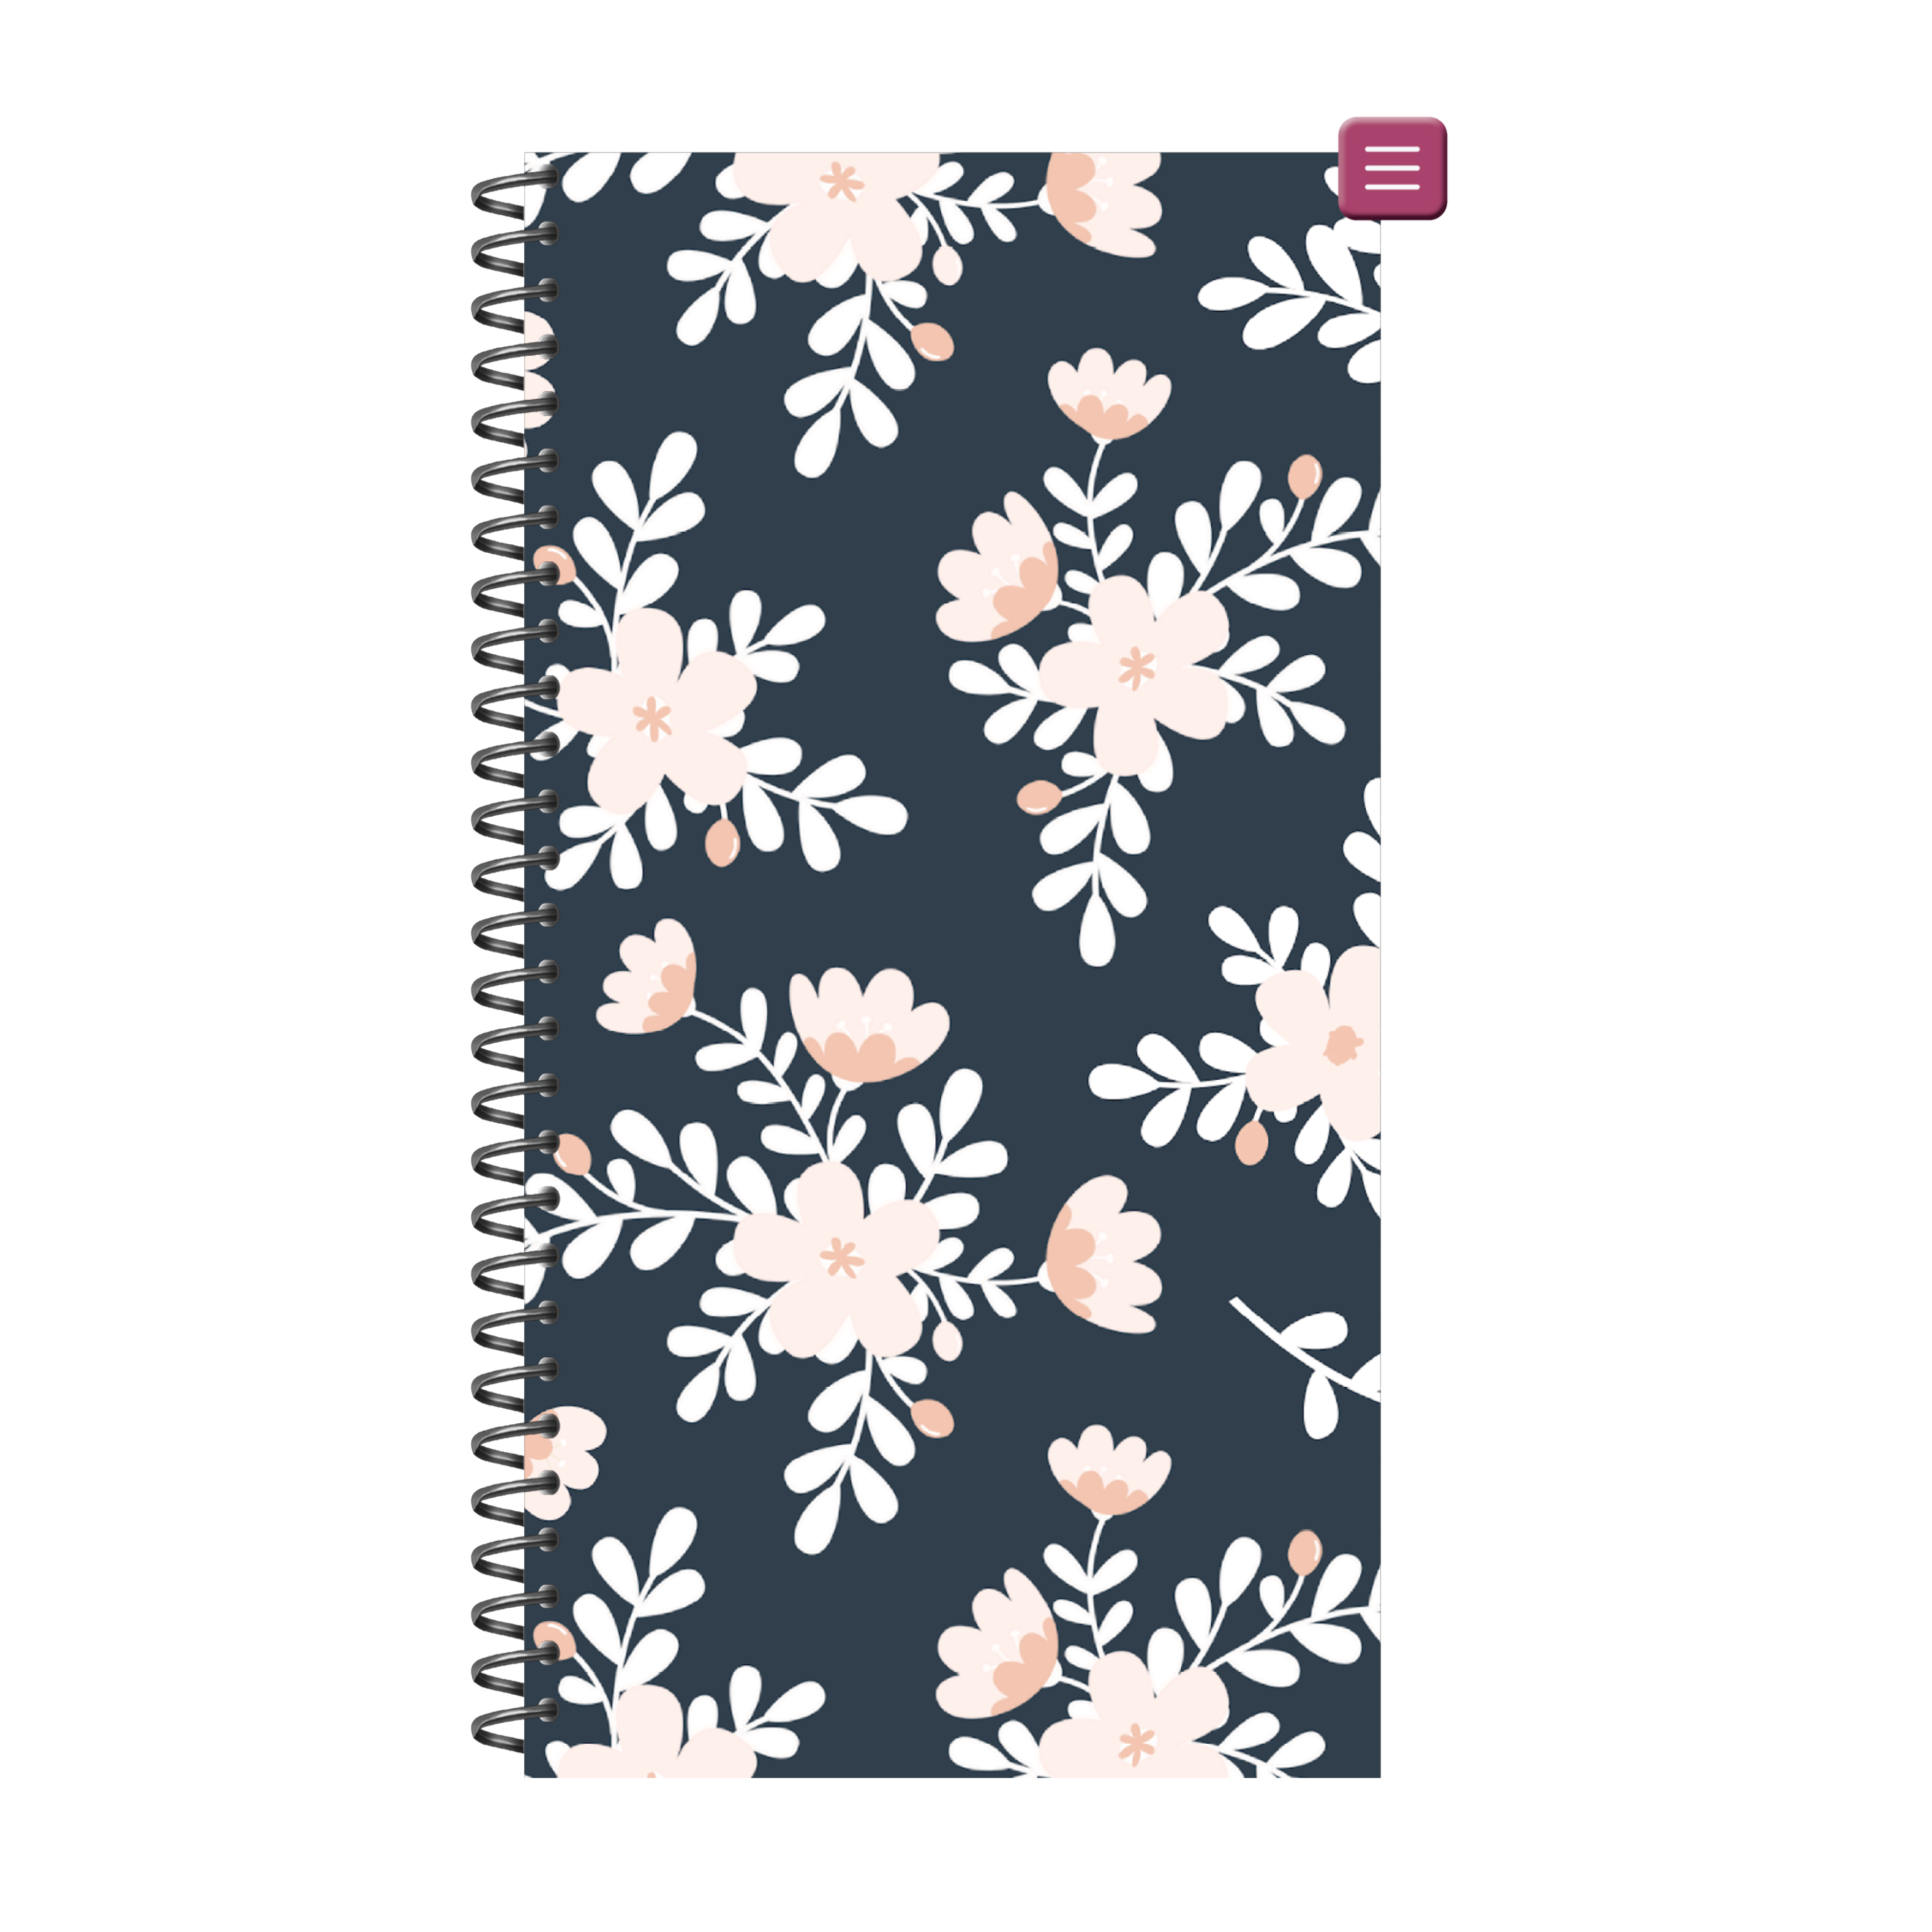 PhoneLife Interchangeable Digital Planner Cover | MIDNIGHT BOHO BLOSSOMS 4